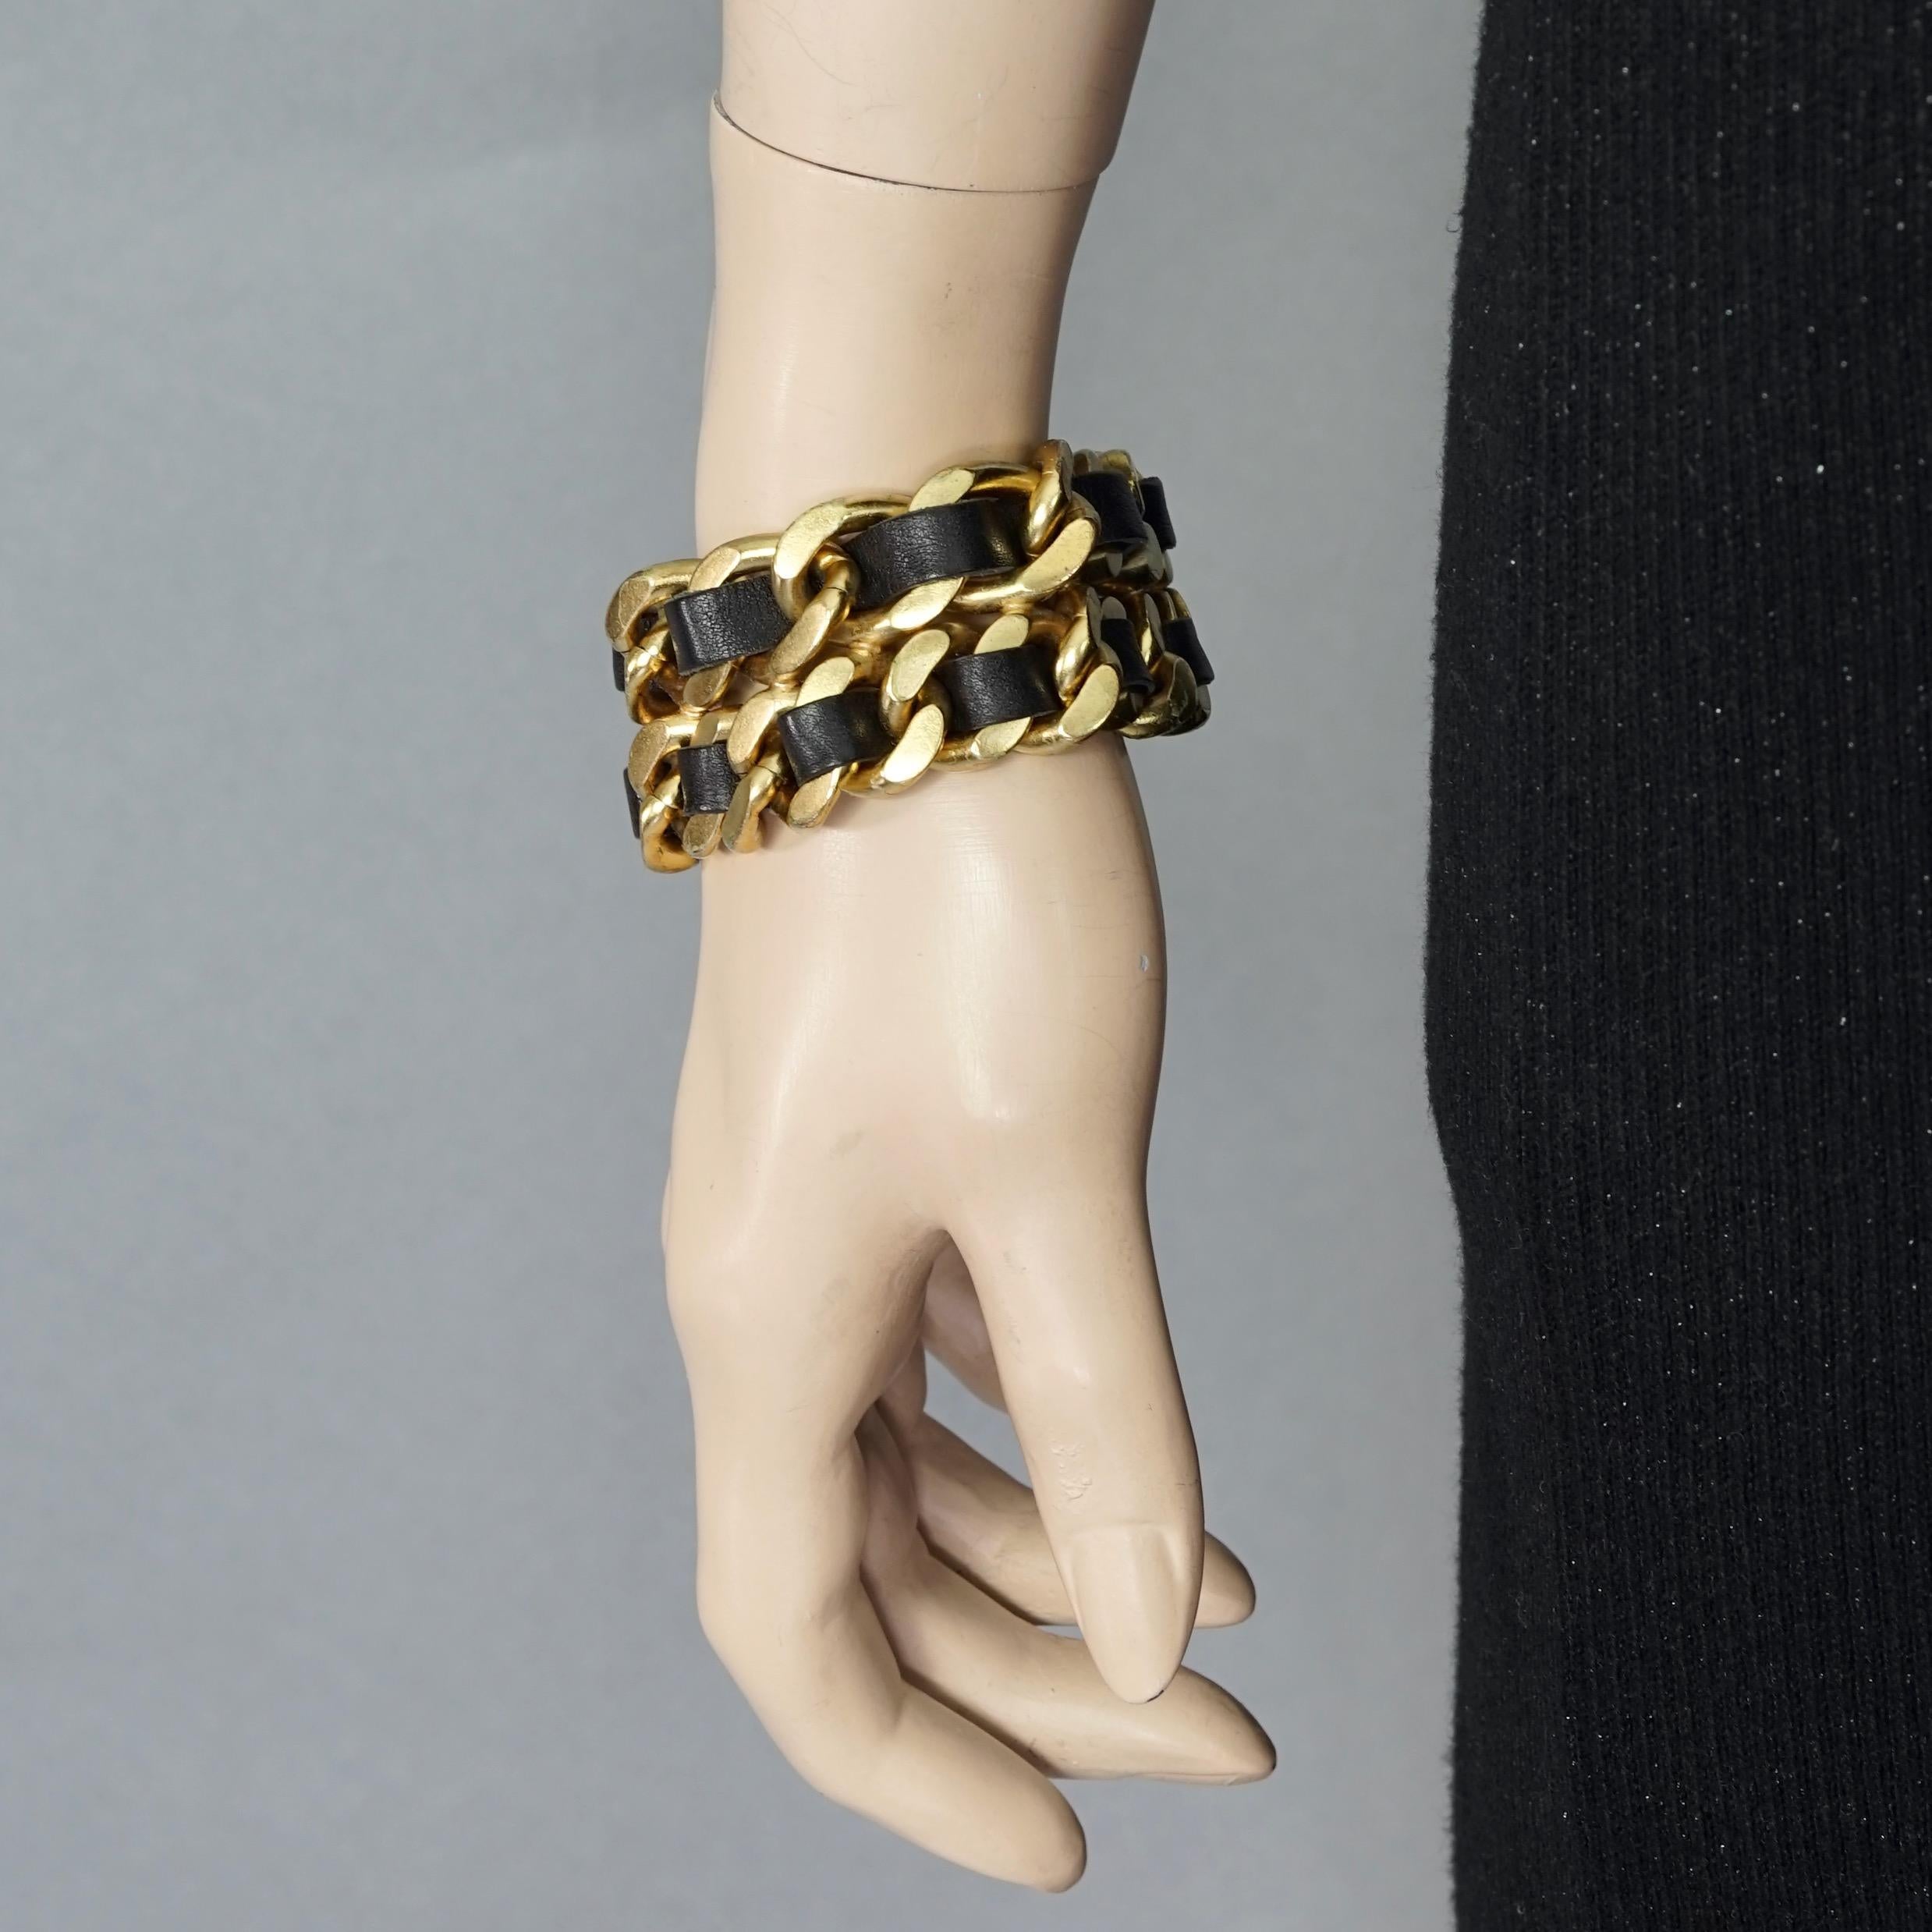 Vintage 1995 CHANEL Double Leather Chain Cuff Bracelet

Measurements:
Height: 1.22 inches (3.1 cm)
Wearable Length: 7.48 inches (19 cm)

Features:
- 100% Authentic CHANEL.
- Double tiered interlaced chain and black leather.
- Gold tone hardware.
-